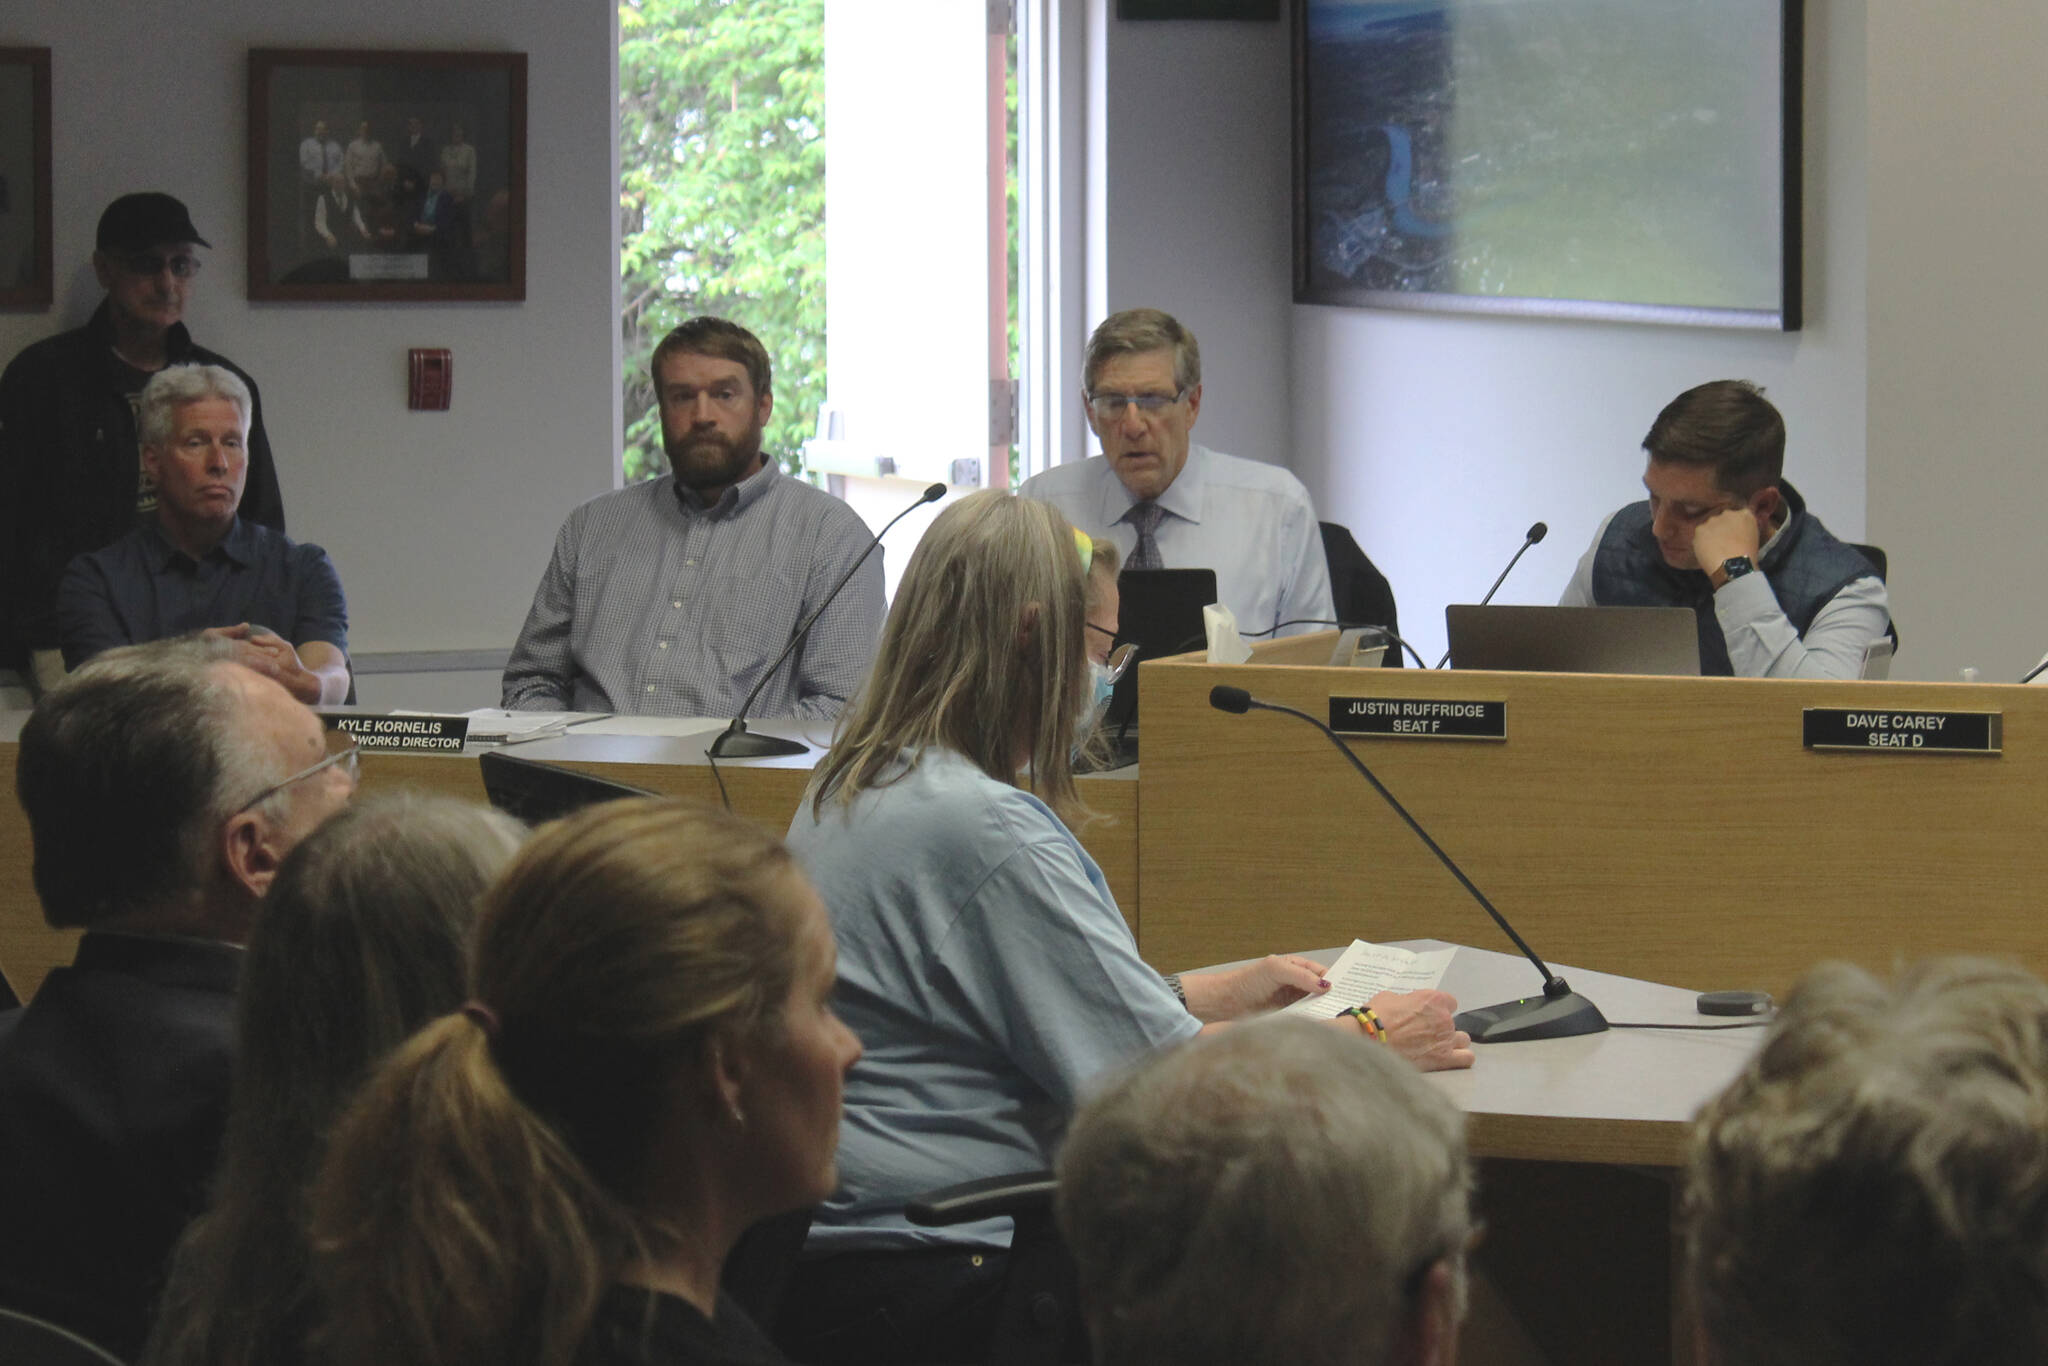 Michele Vasquez testifies before the Soldotna City Council during a council meeting on Wednesday, July 13, 2022, in Soldotna, Alaska. Many attendees voiced their thoughts on a performance given by a drag queen in Soldotna Creek Park last month. (Ashlyn O’Hara/Peninsula Clarion)